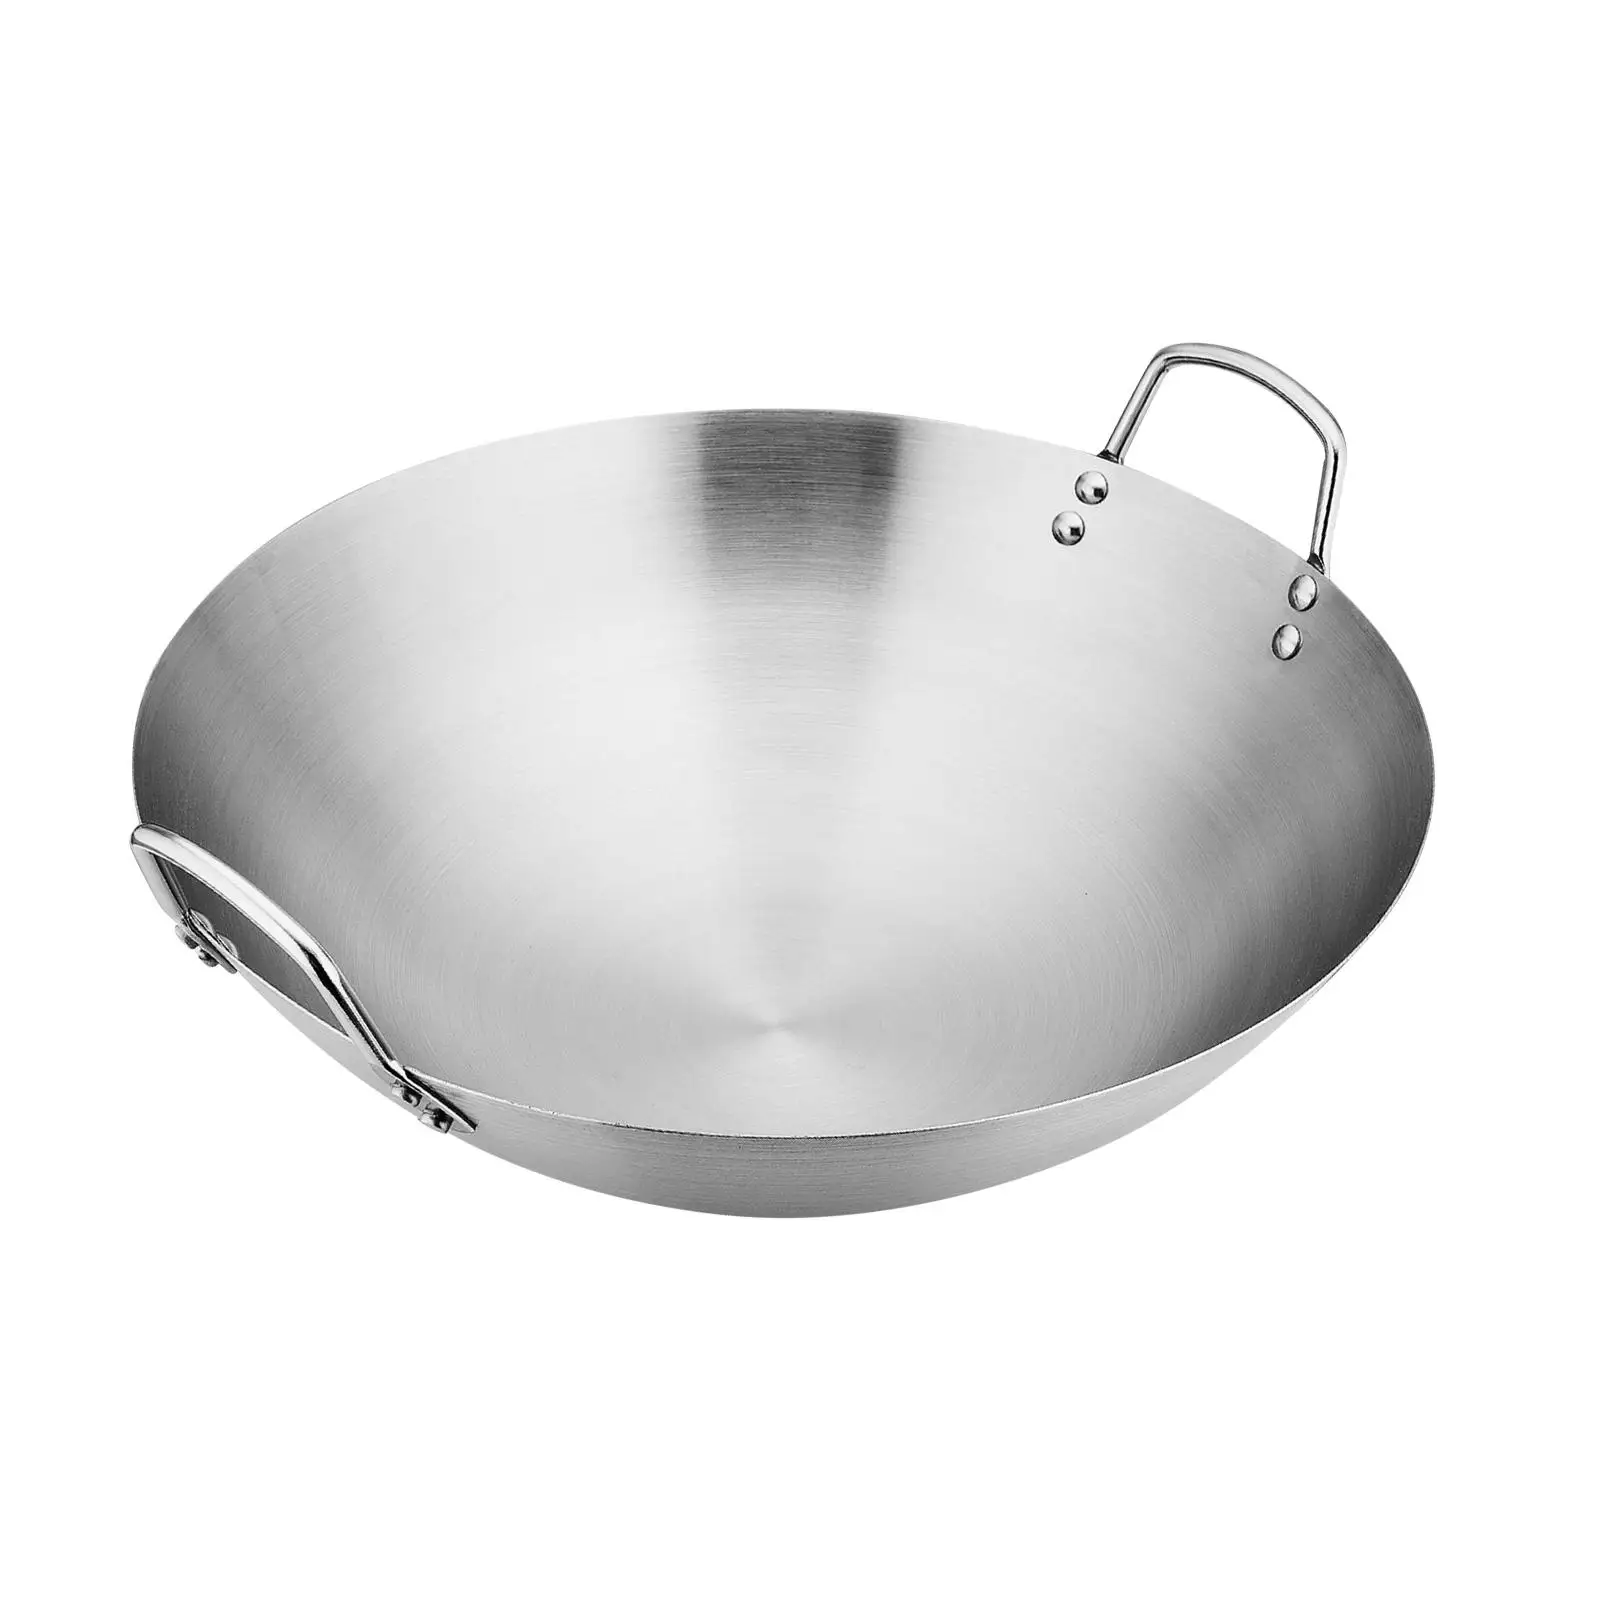 Steel Saute Pan Dual Handle Cookware Utensils Traditional Portable Frying Fry Pot for Household Cooking Eggs,Sausages, Fish BBQ